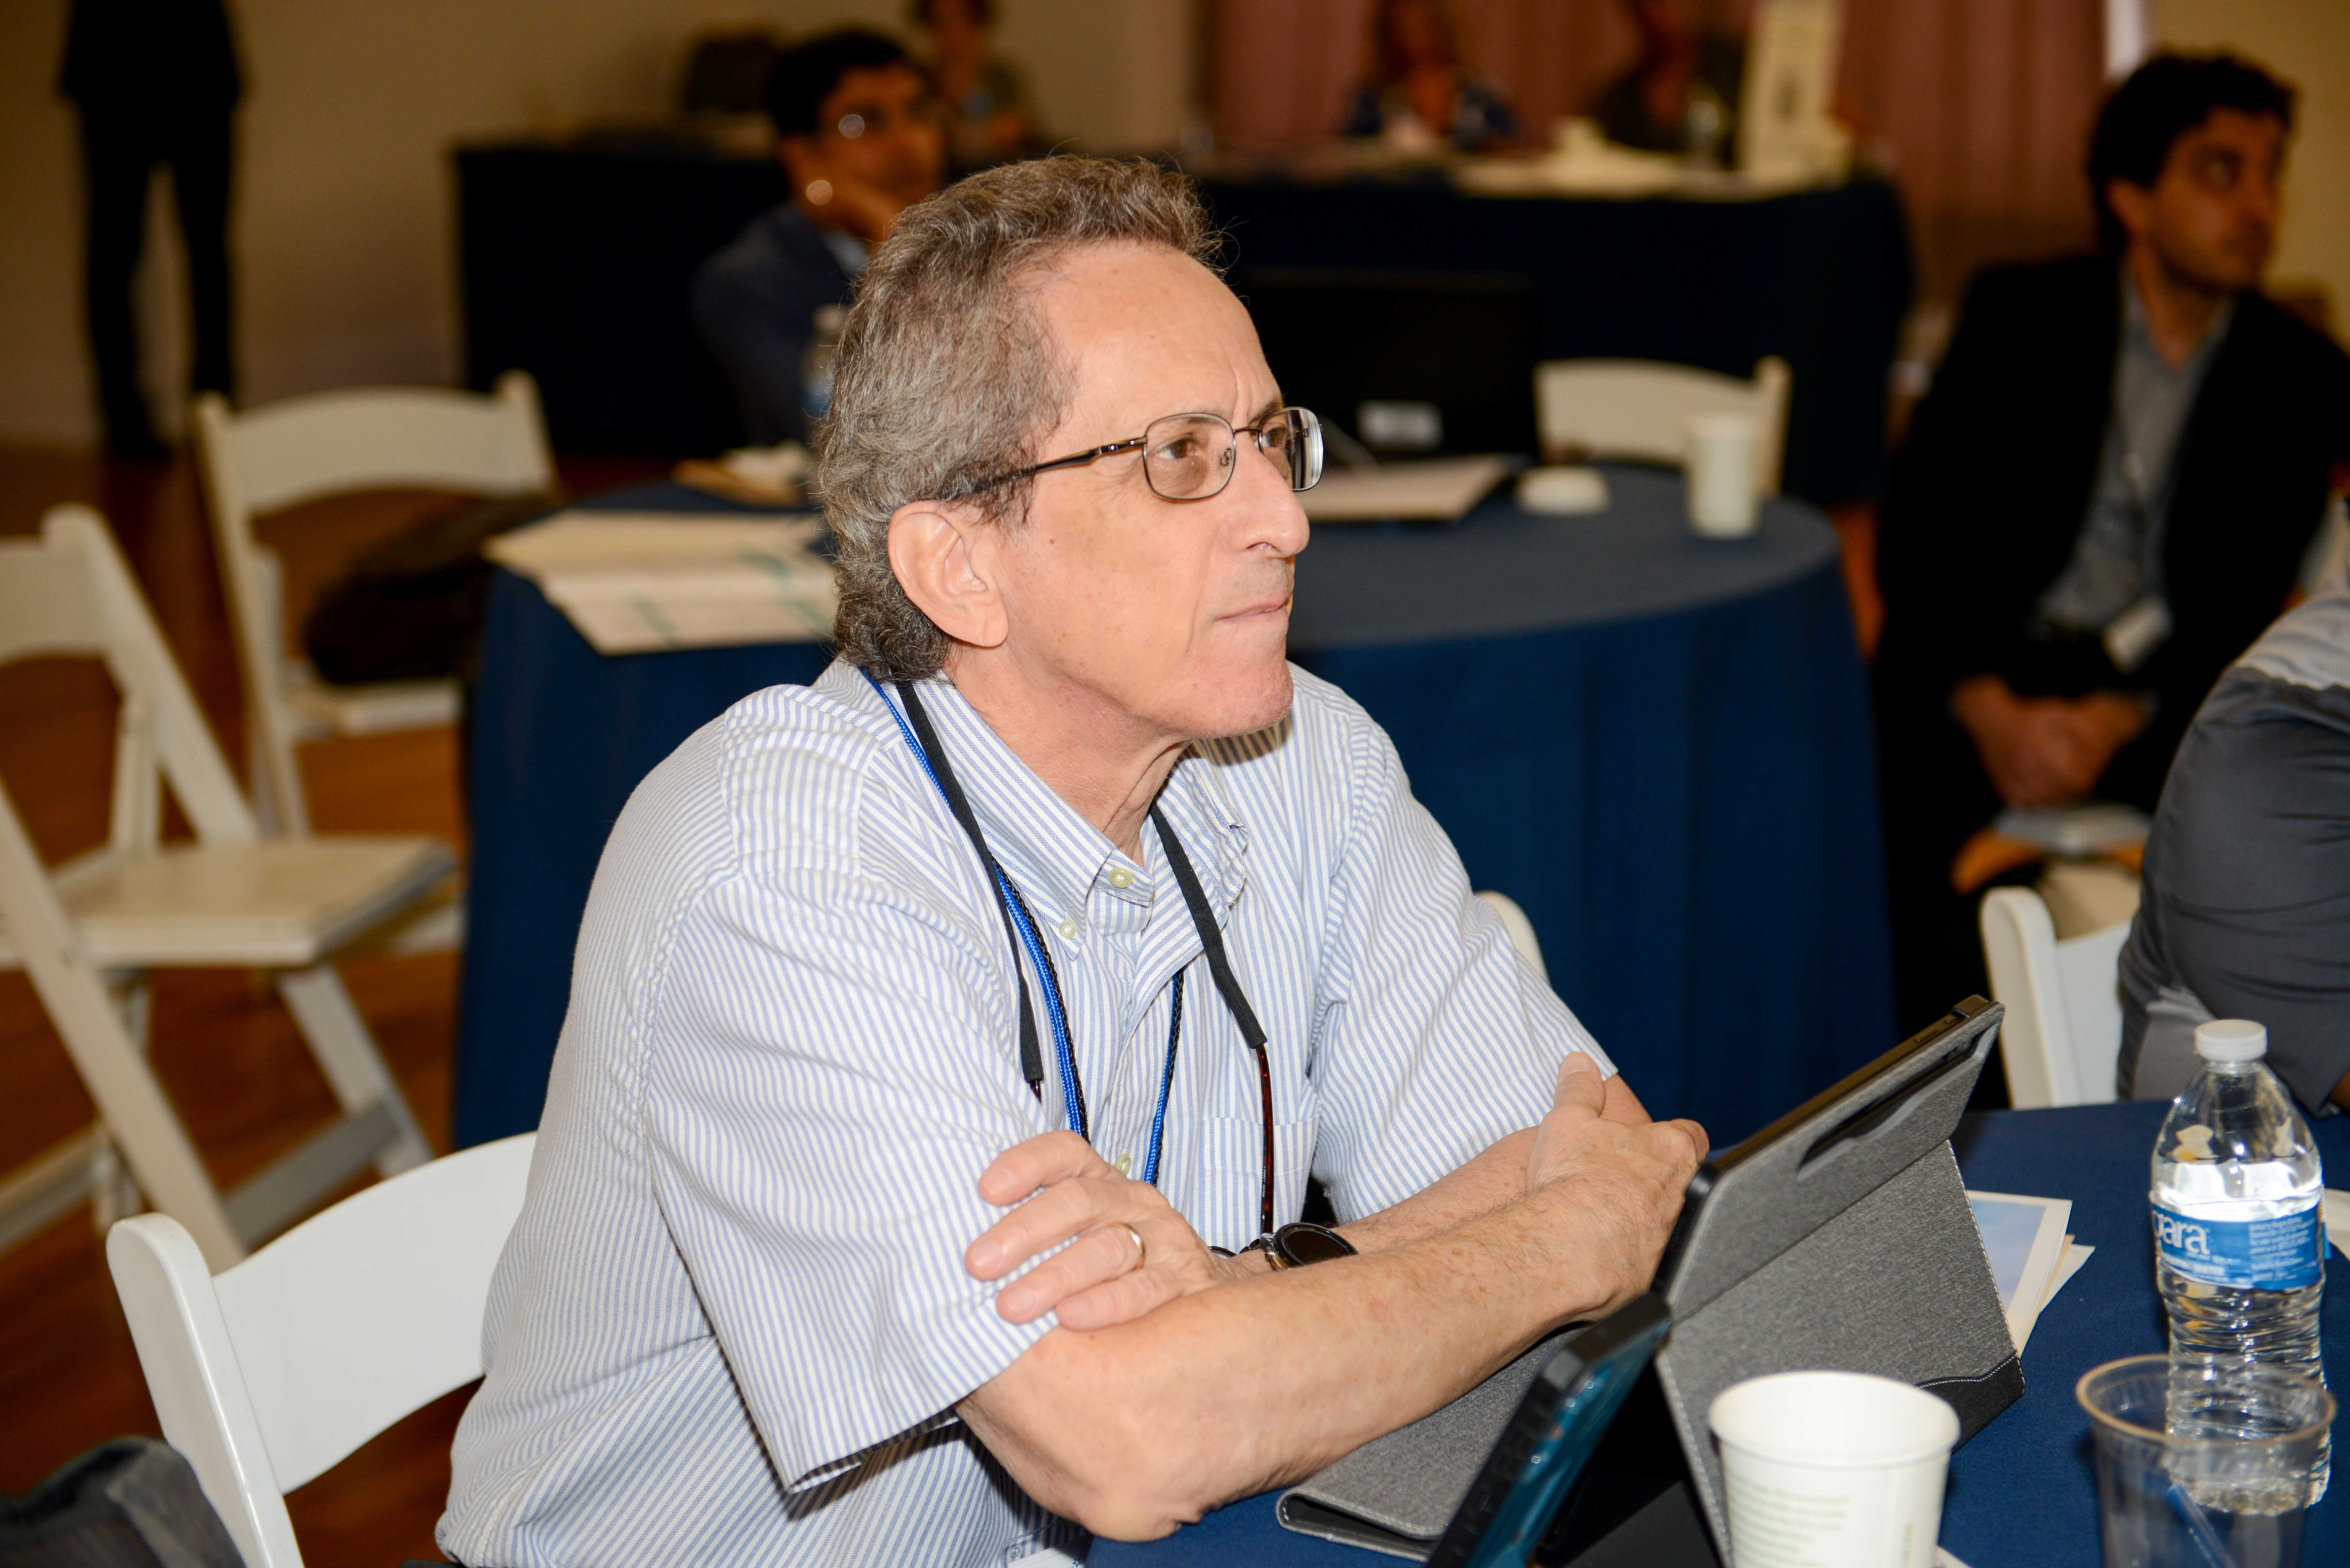 Patient Eugene Lisansky serves on the Foundation’s Pragmatic Clinical Research Workgroup.